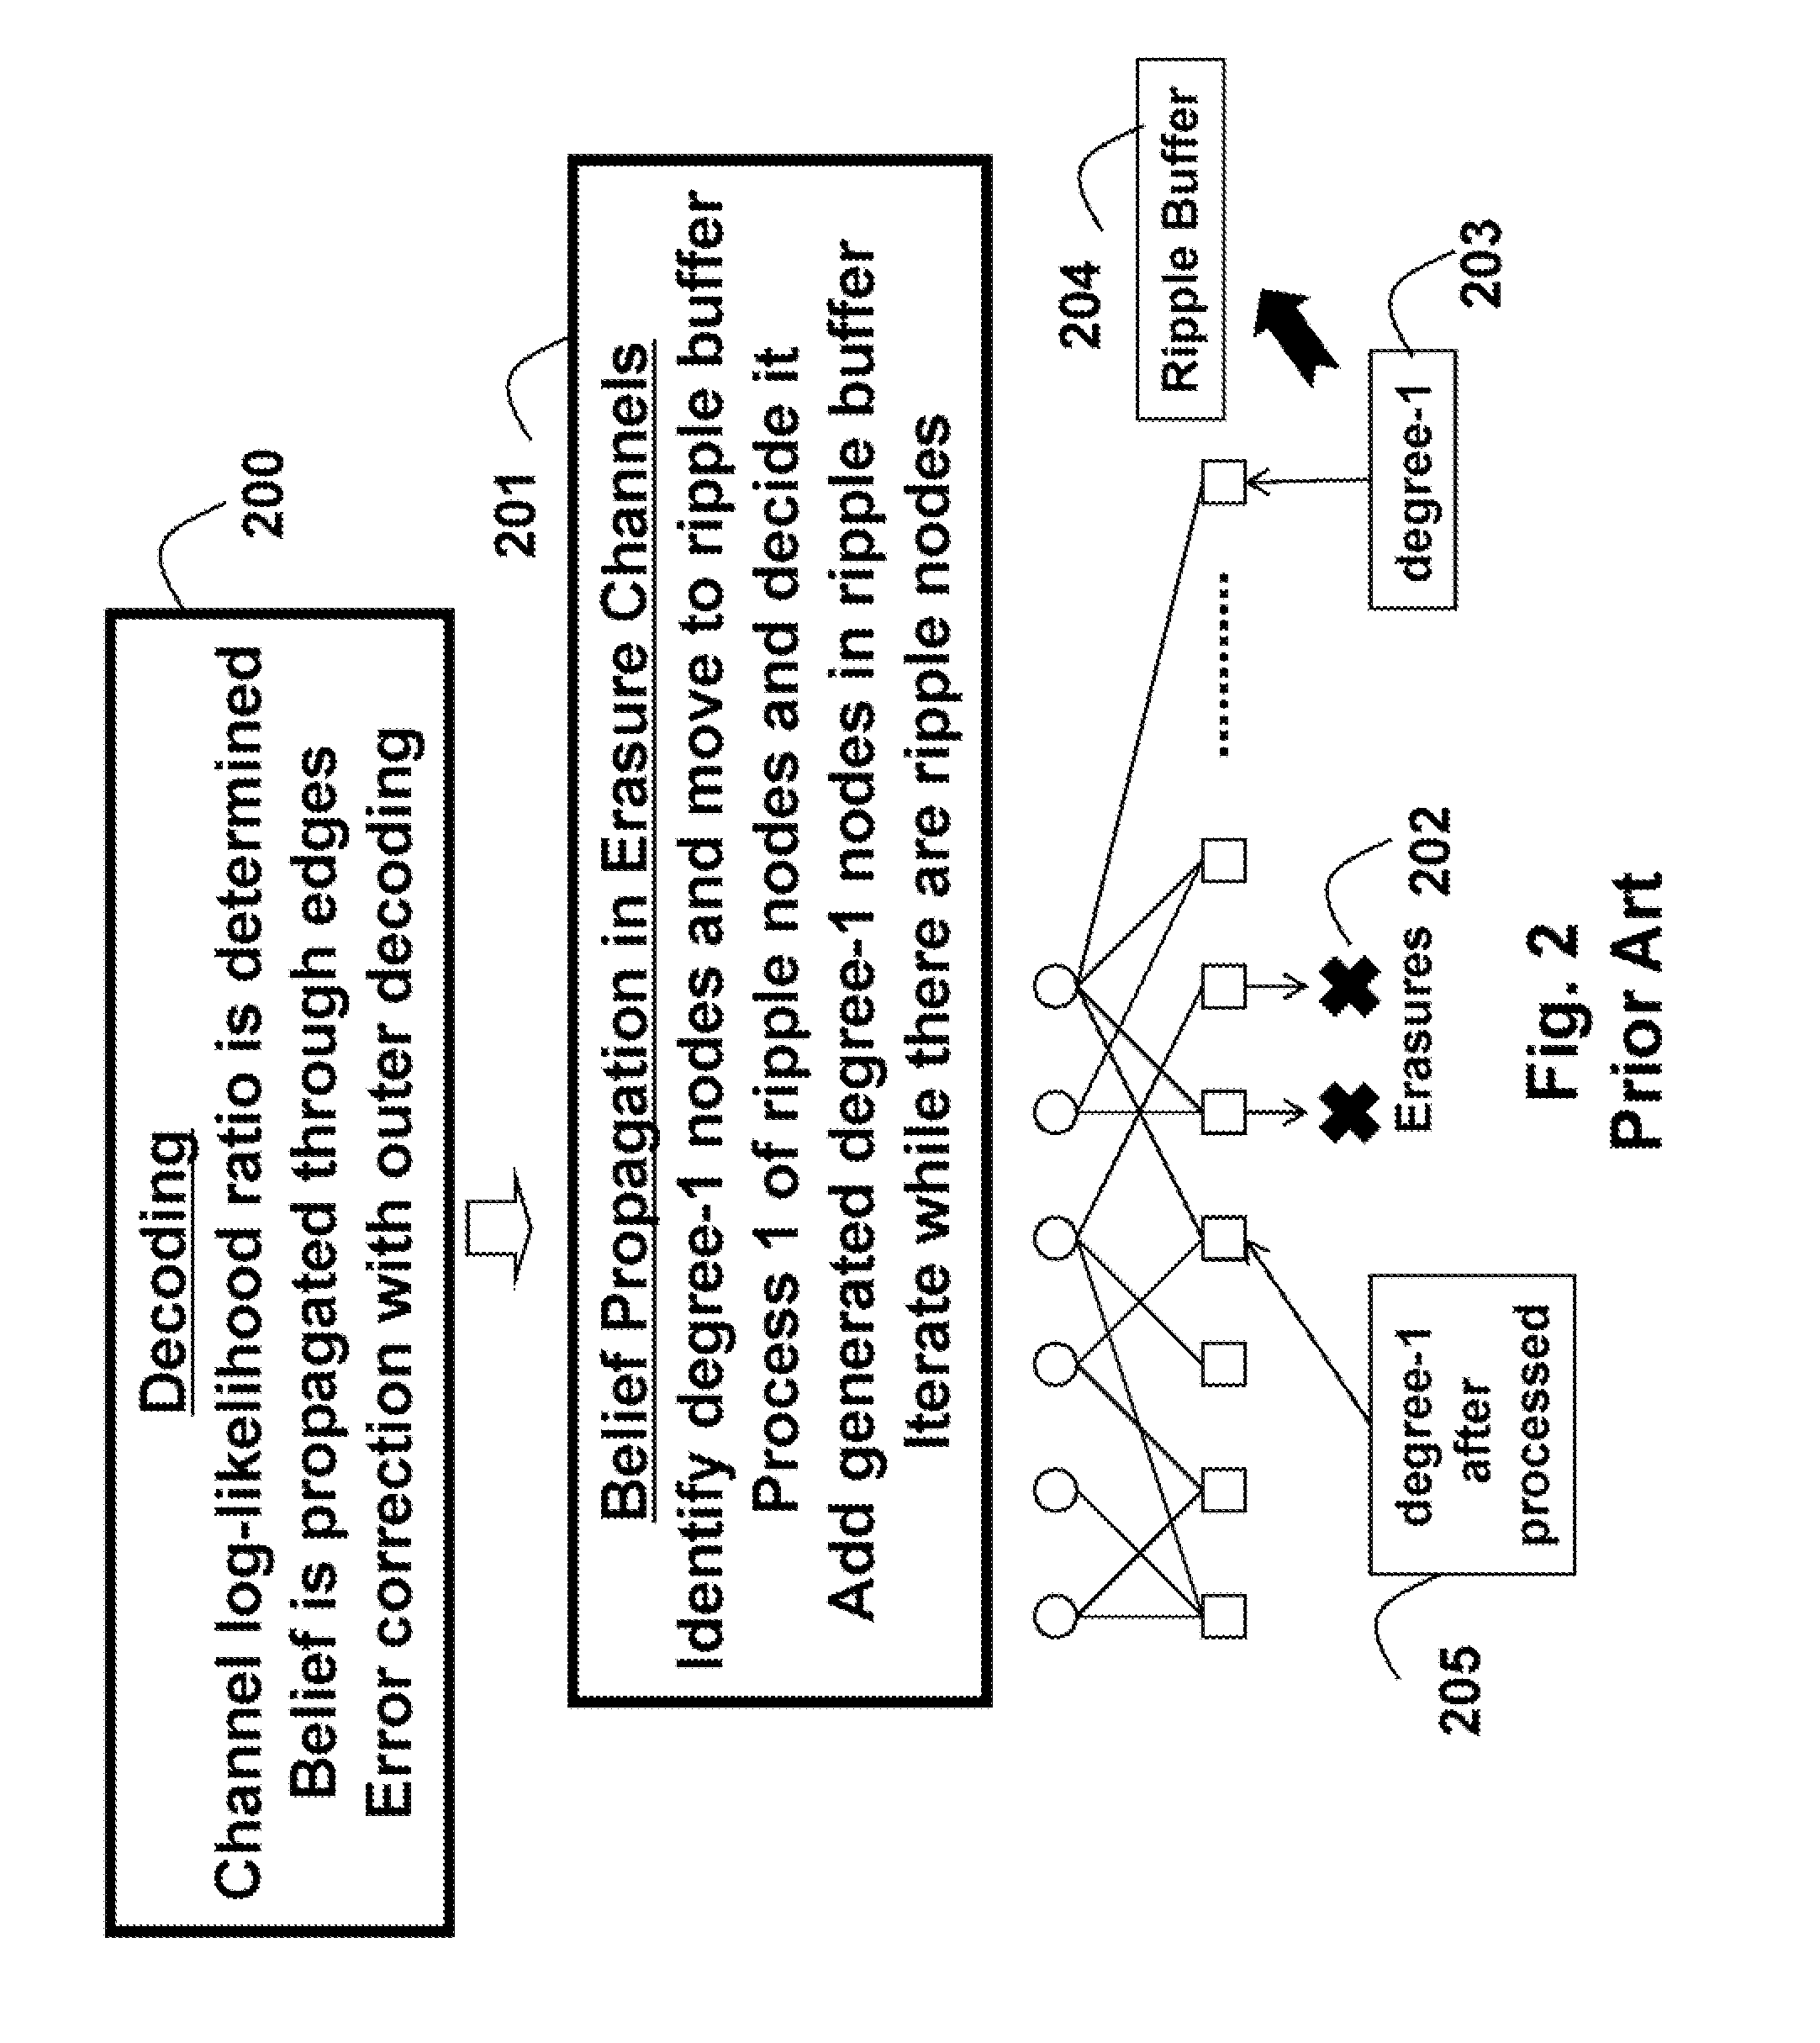 Method and System for Communicating Multimedia Using Reconfigurable Rateless Codes and Decoding In-Process Status Feedback